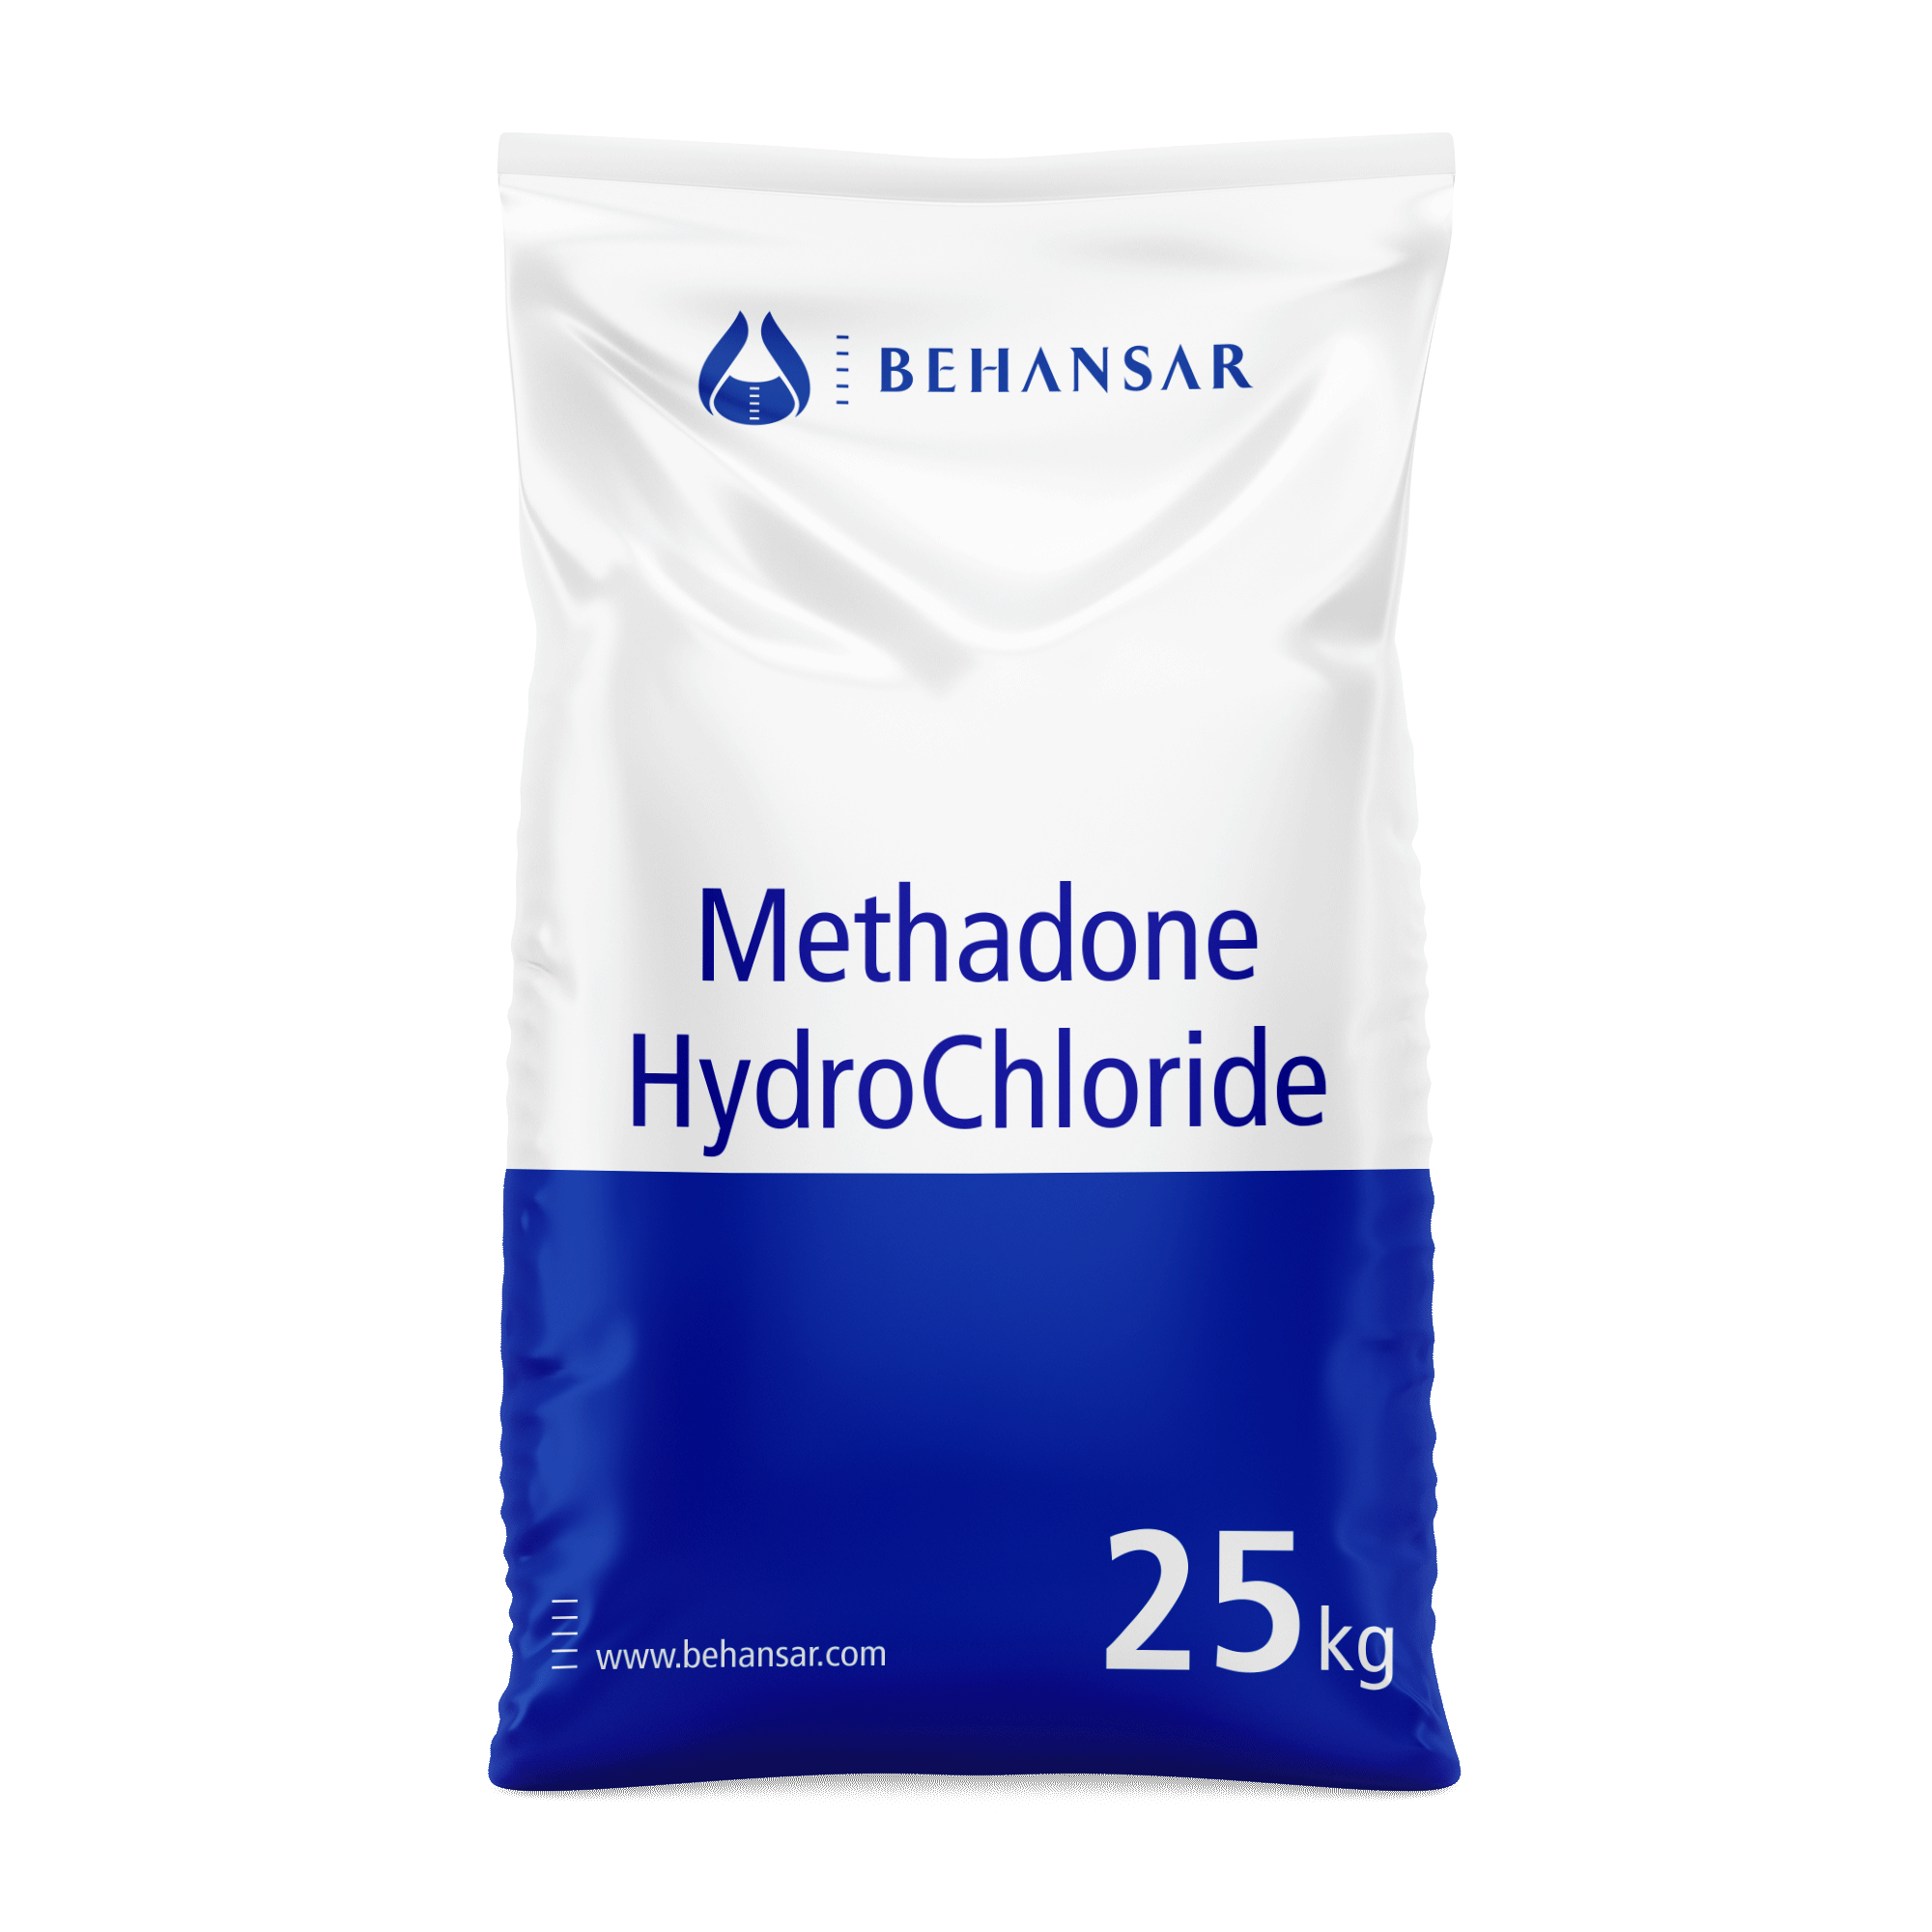 Methadone HydroChloride is one of the products of Behansar Co